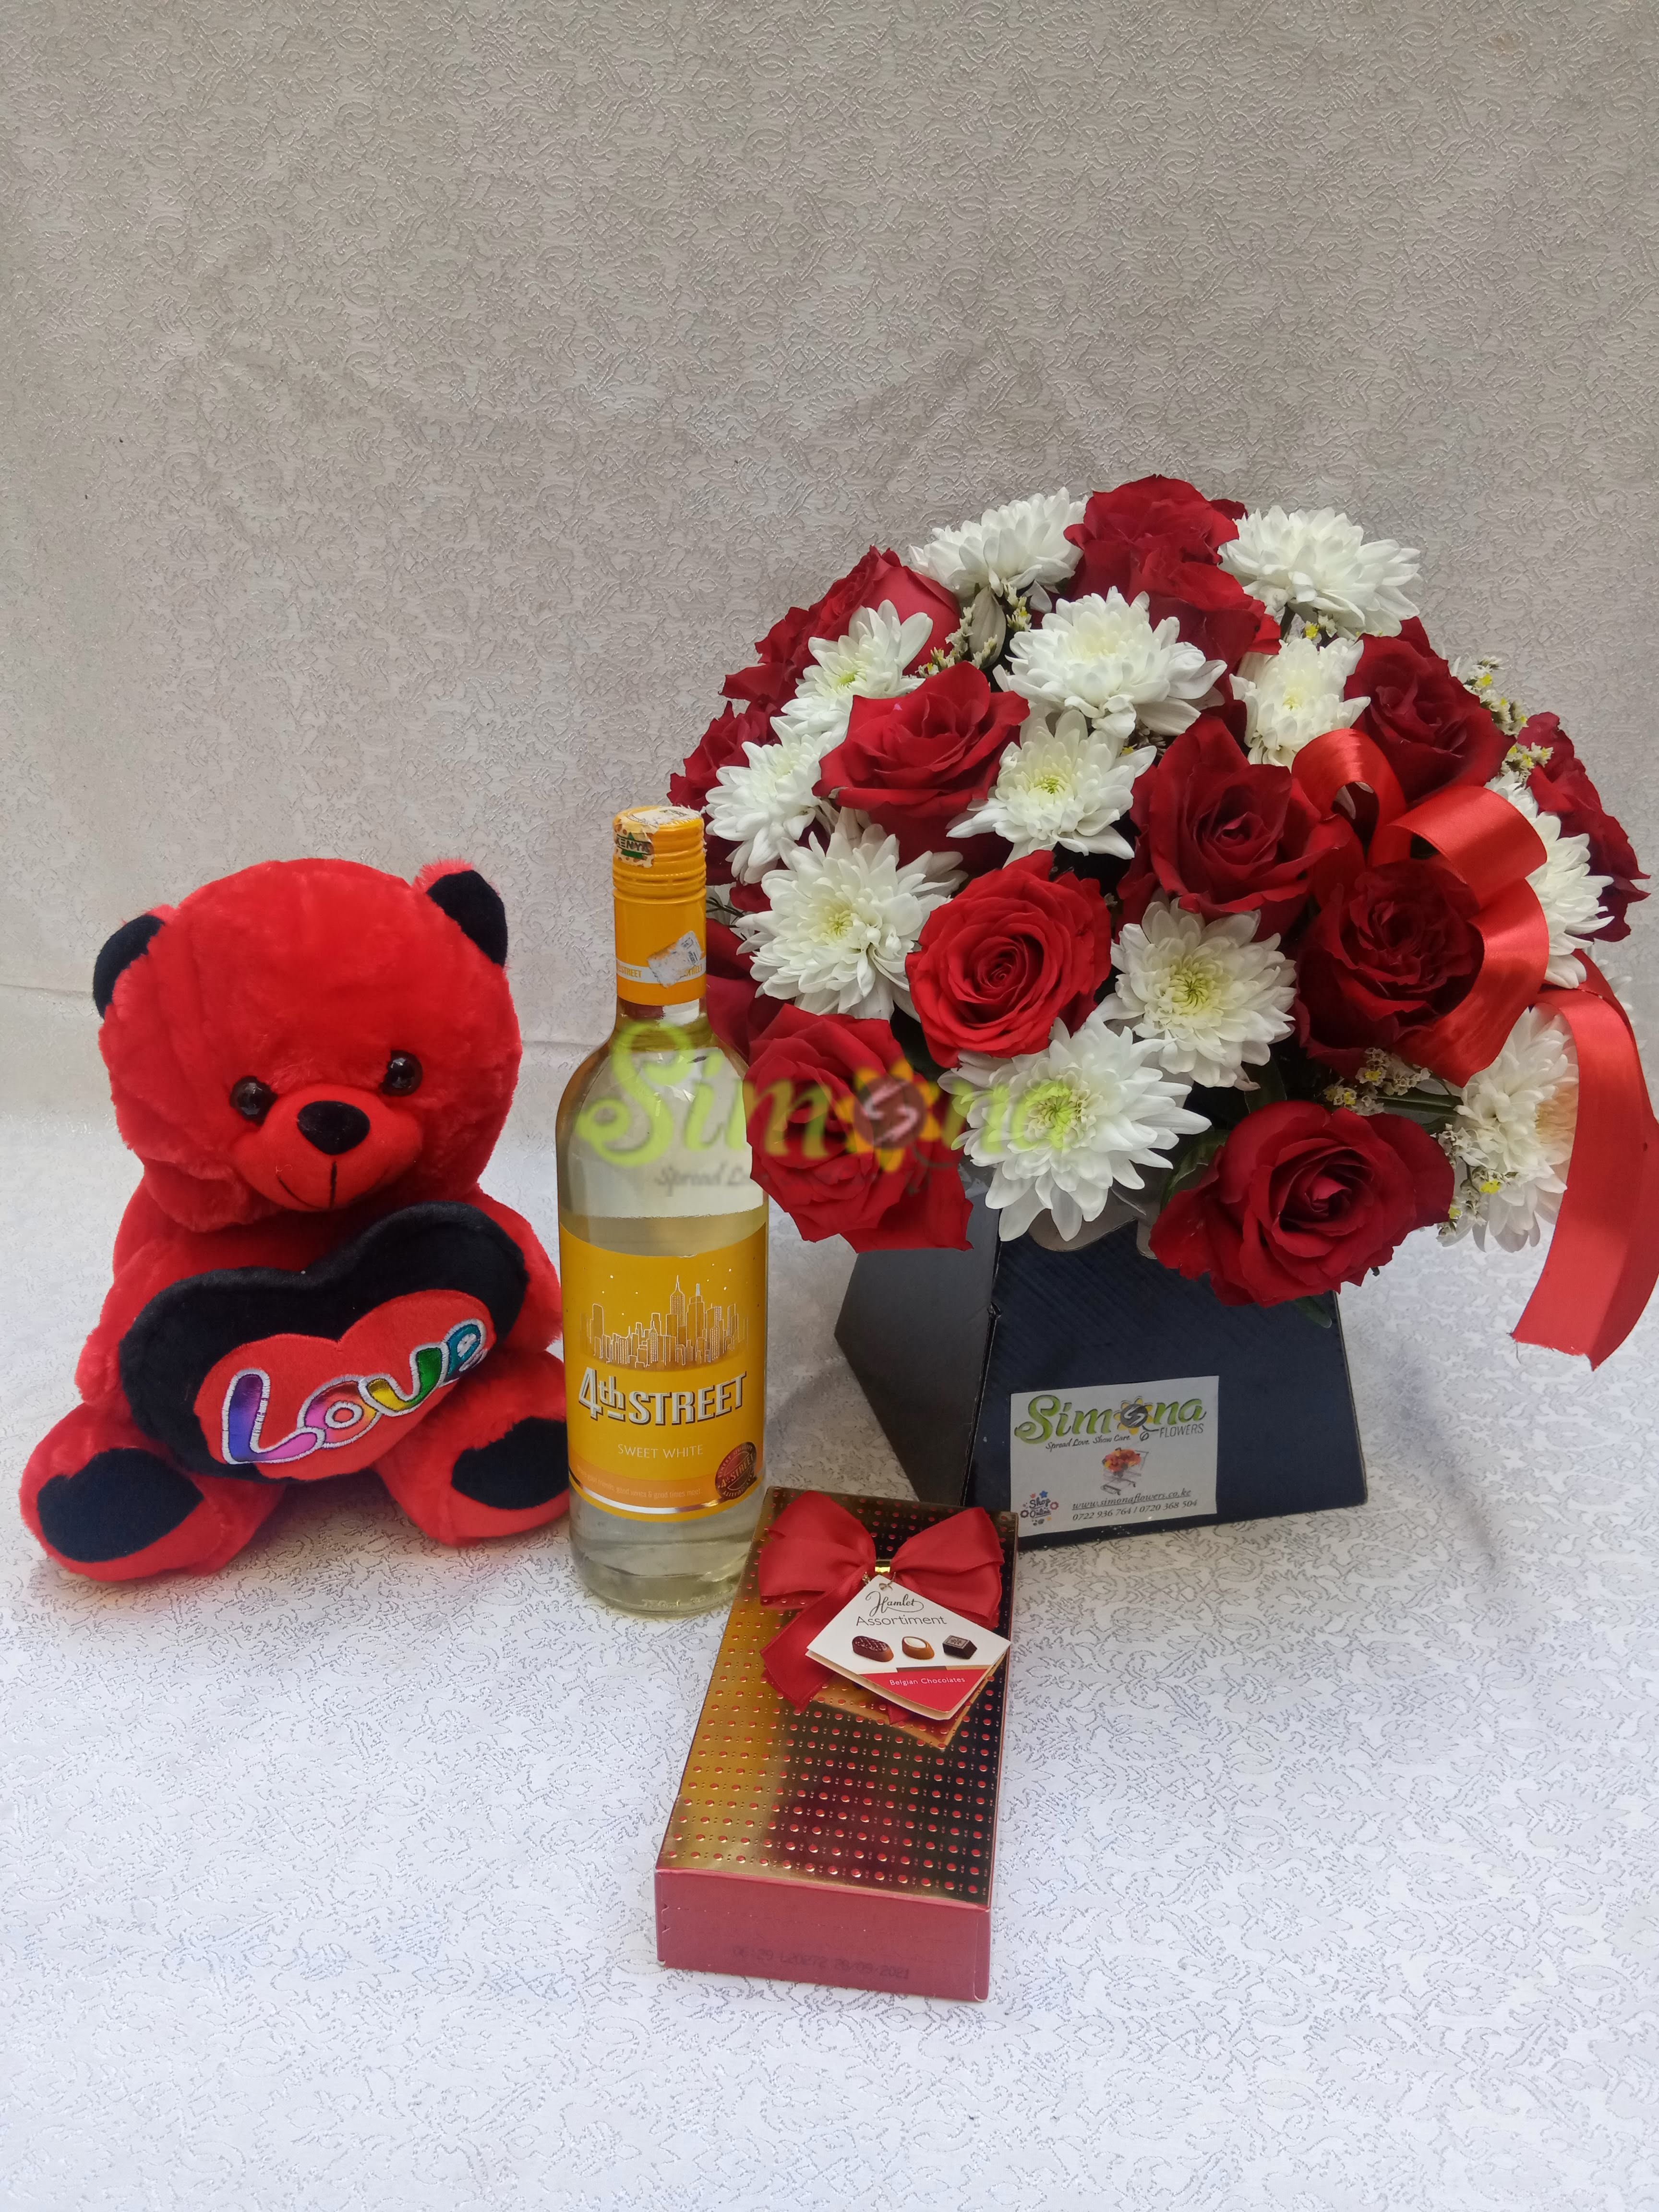 Adorable bouquet with dotted box hamlet chocolate, teddy bear and red wine